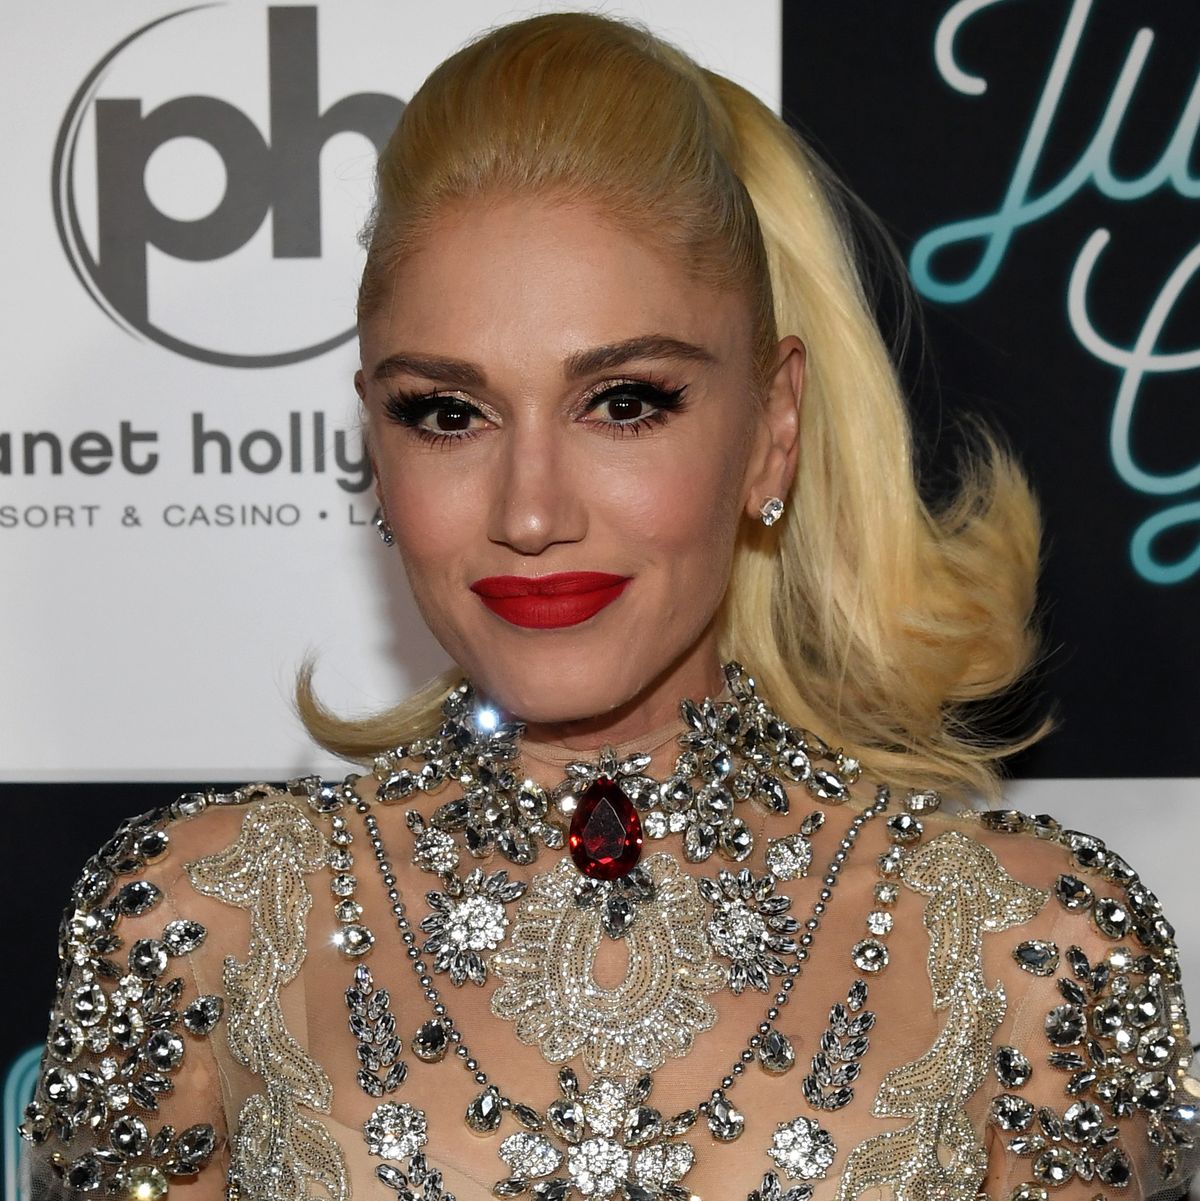 Grand Opening Of "Gwen Stefani - Just A Girl" Residency At Planet Hollywood In Las Vegas